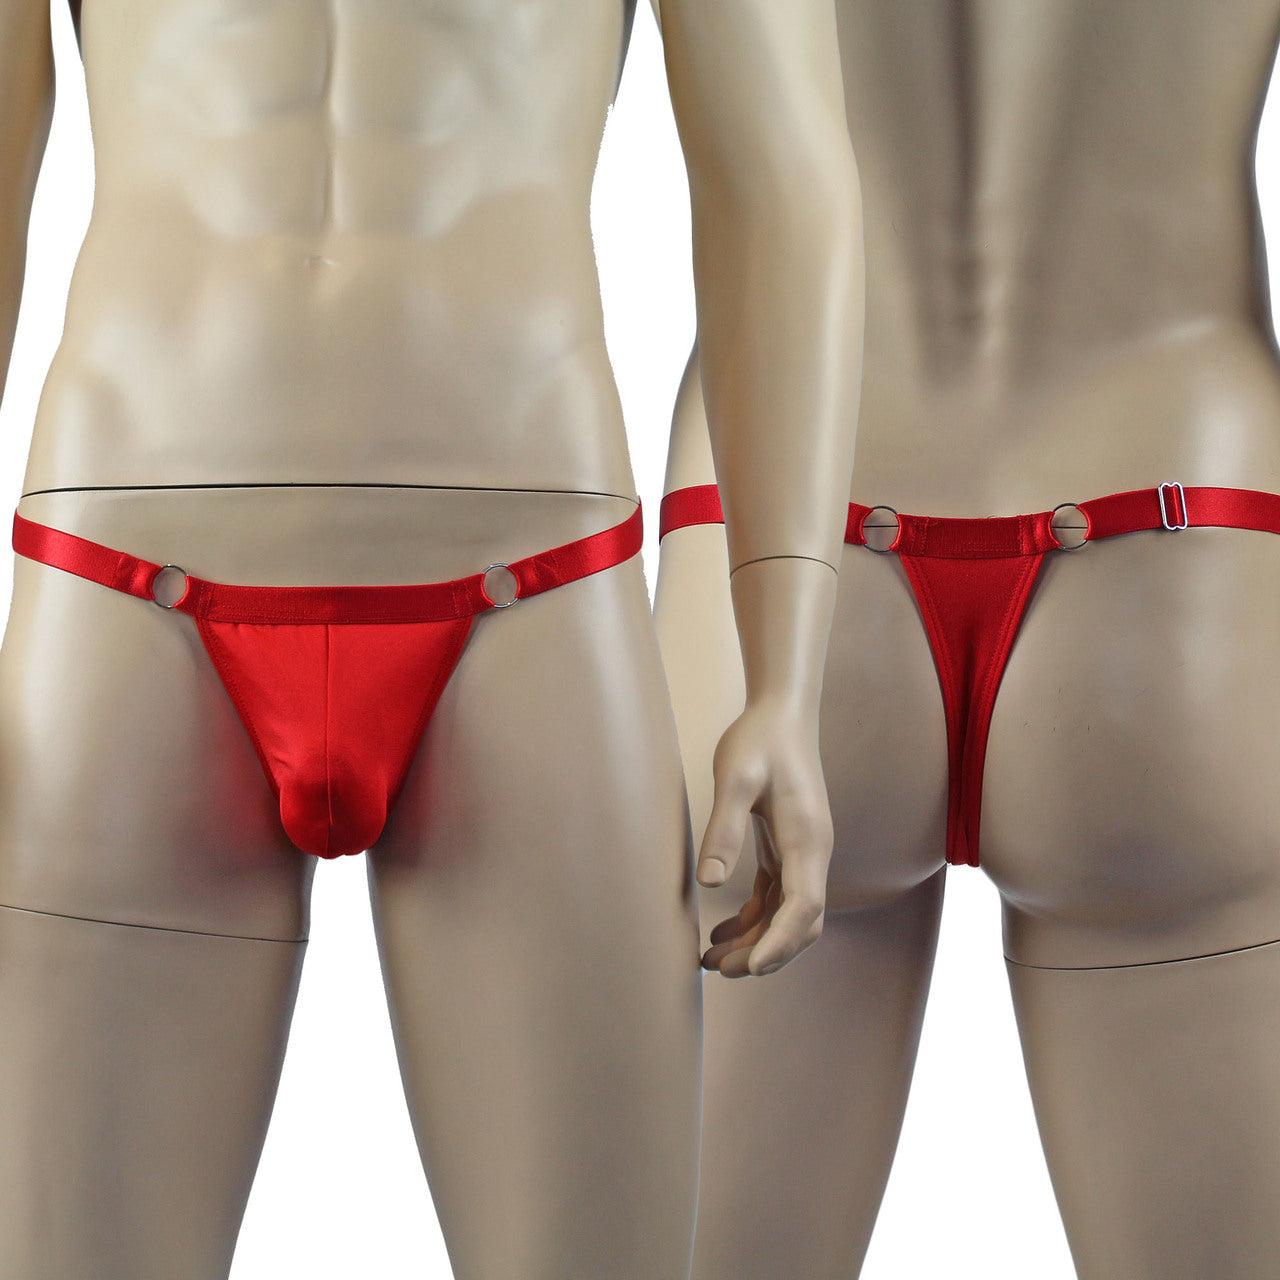 Male Spandex Thong with Ring Sides and Adjustable Strap Red